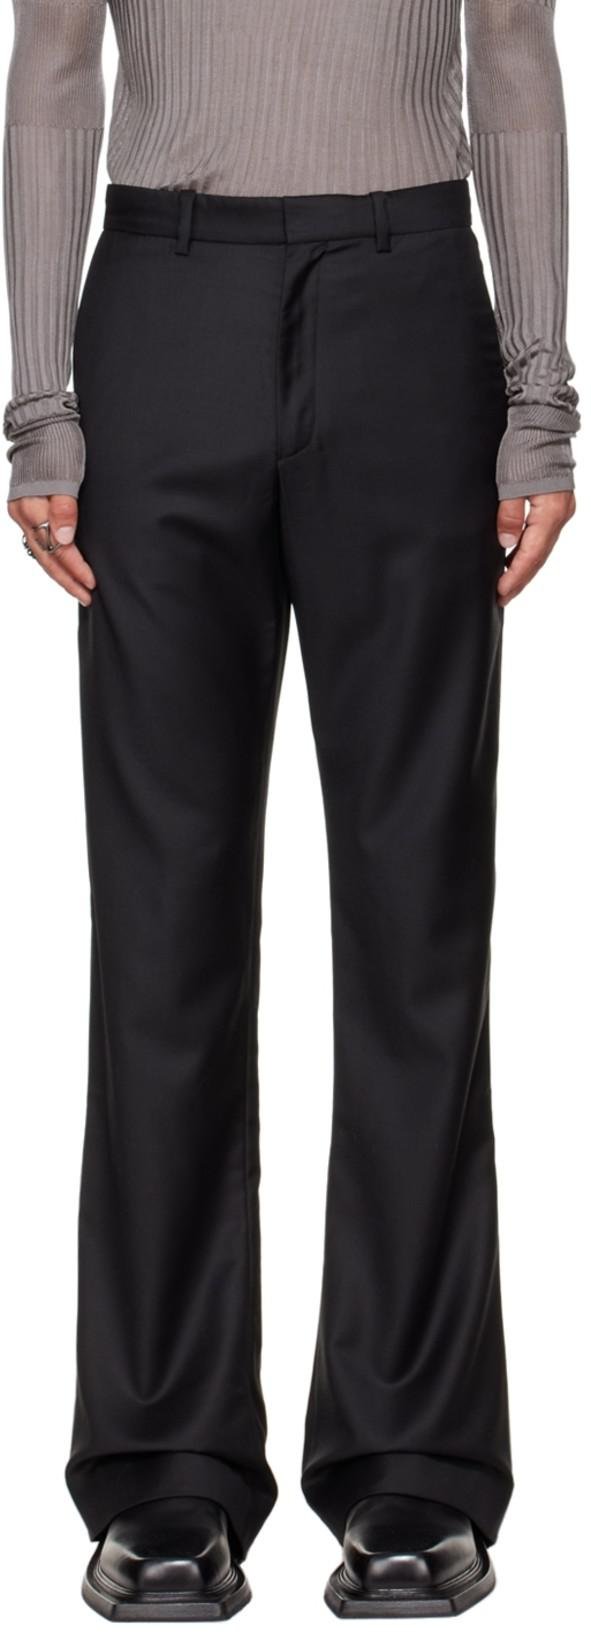 SSENSE Exclusive Black Flared Trousers by AARON ESH